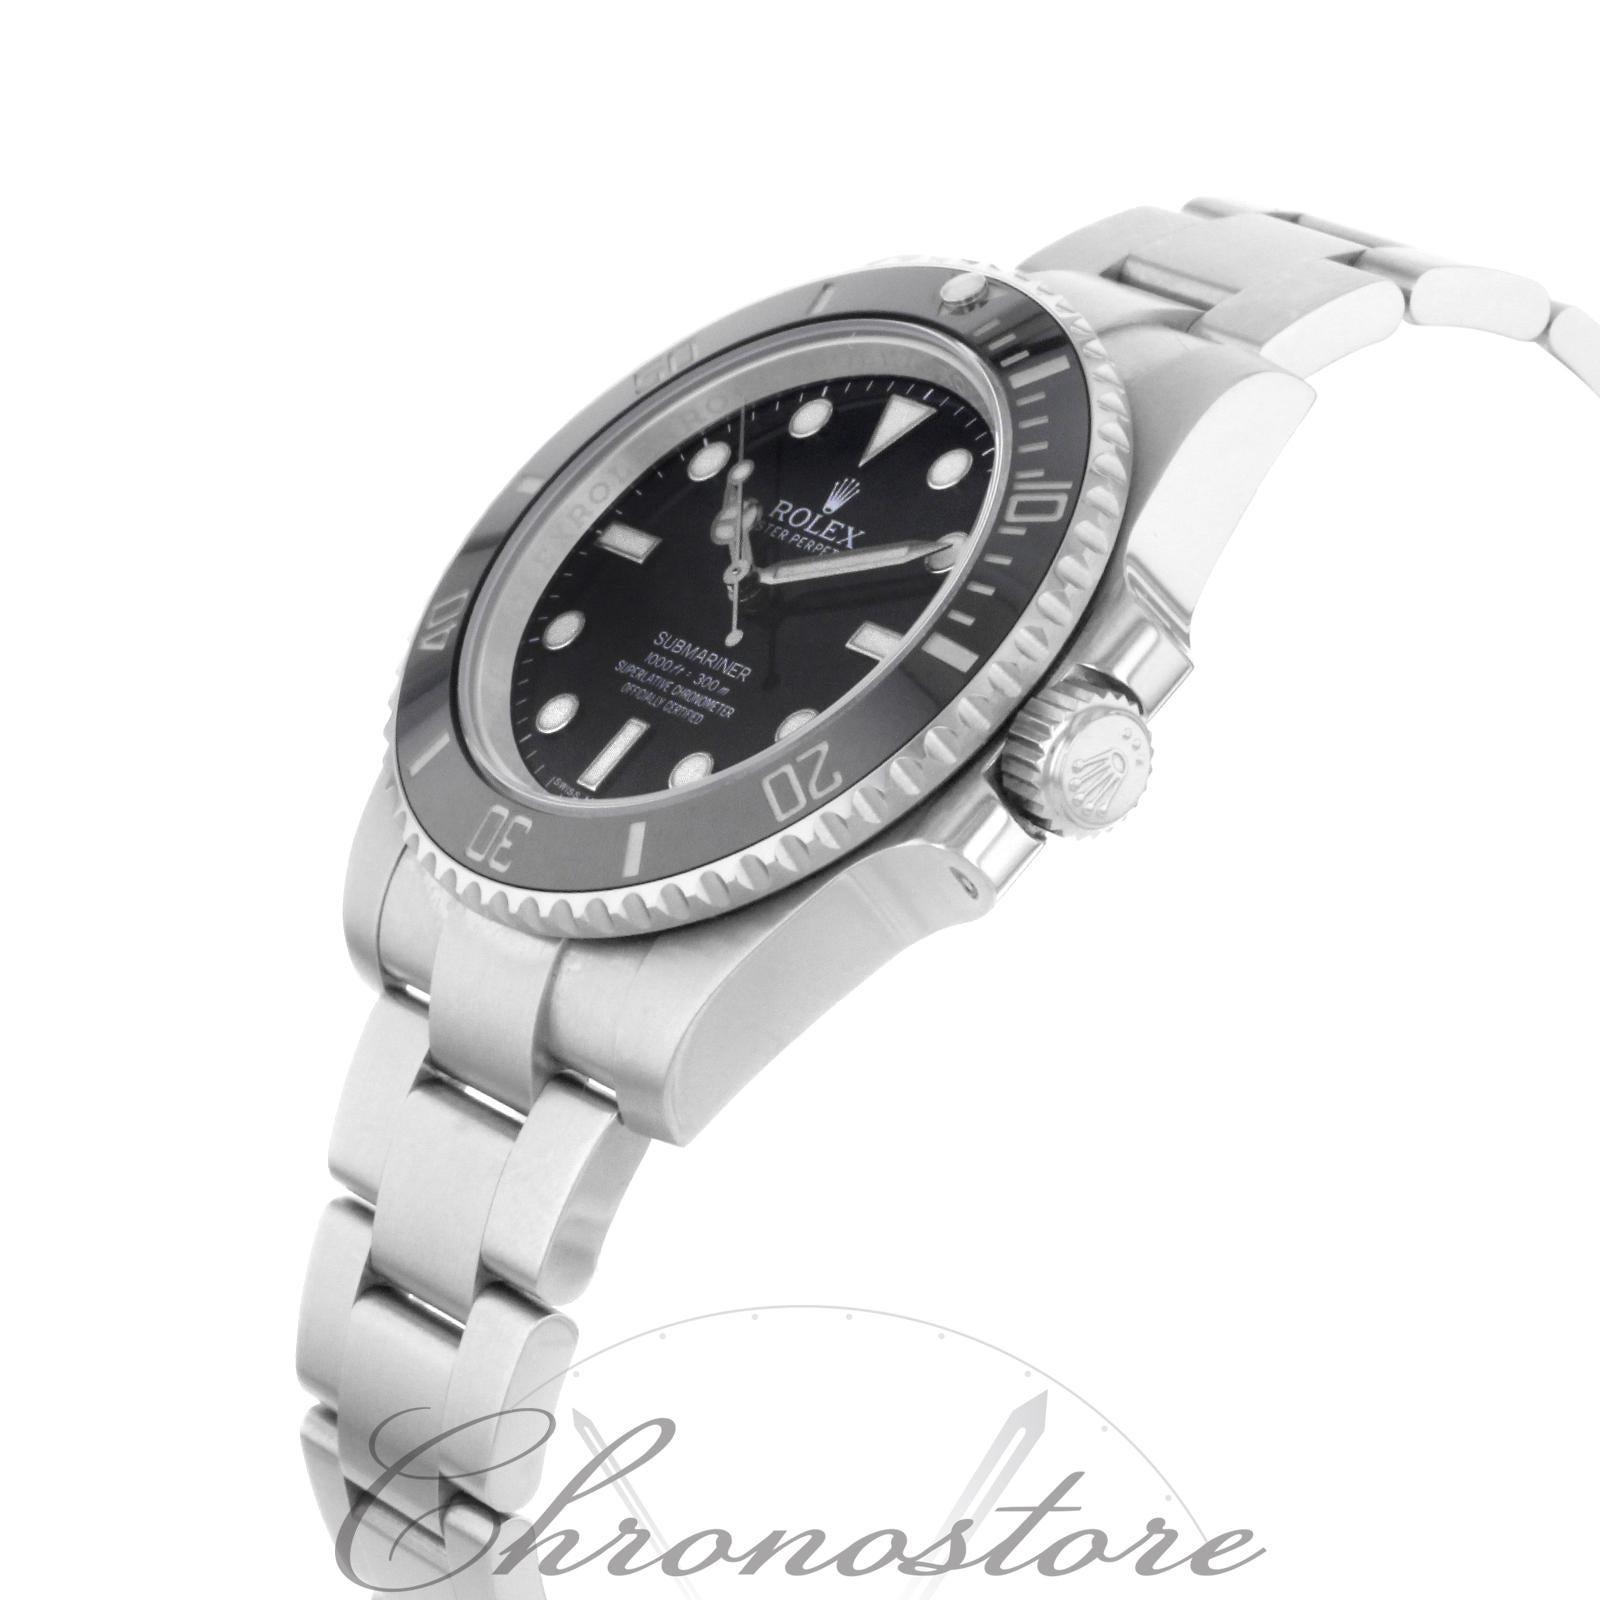 Rolex Submariner No Date Stainless Steel Black Dial Automatic Men's Watch 114060 3